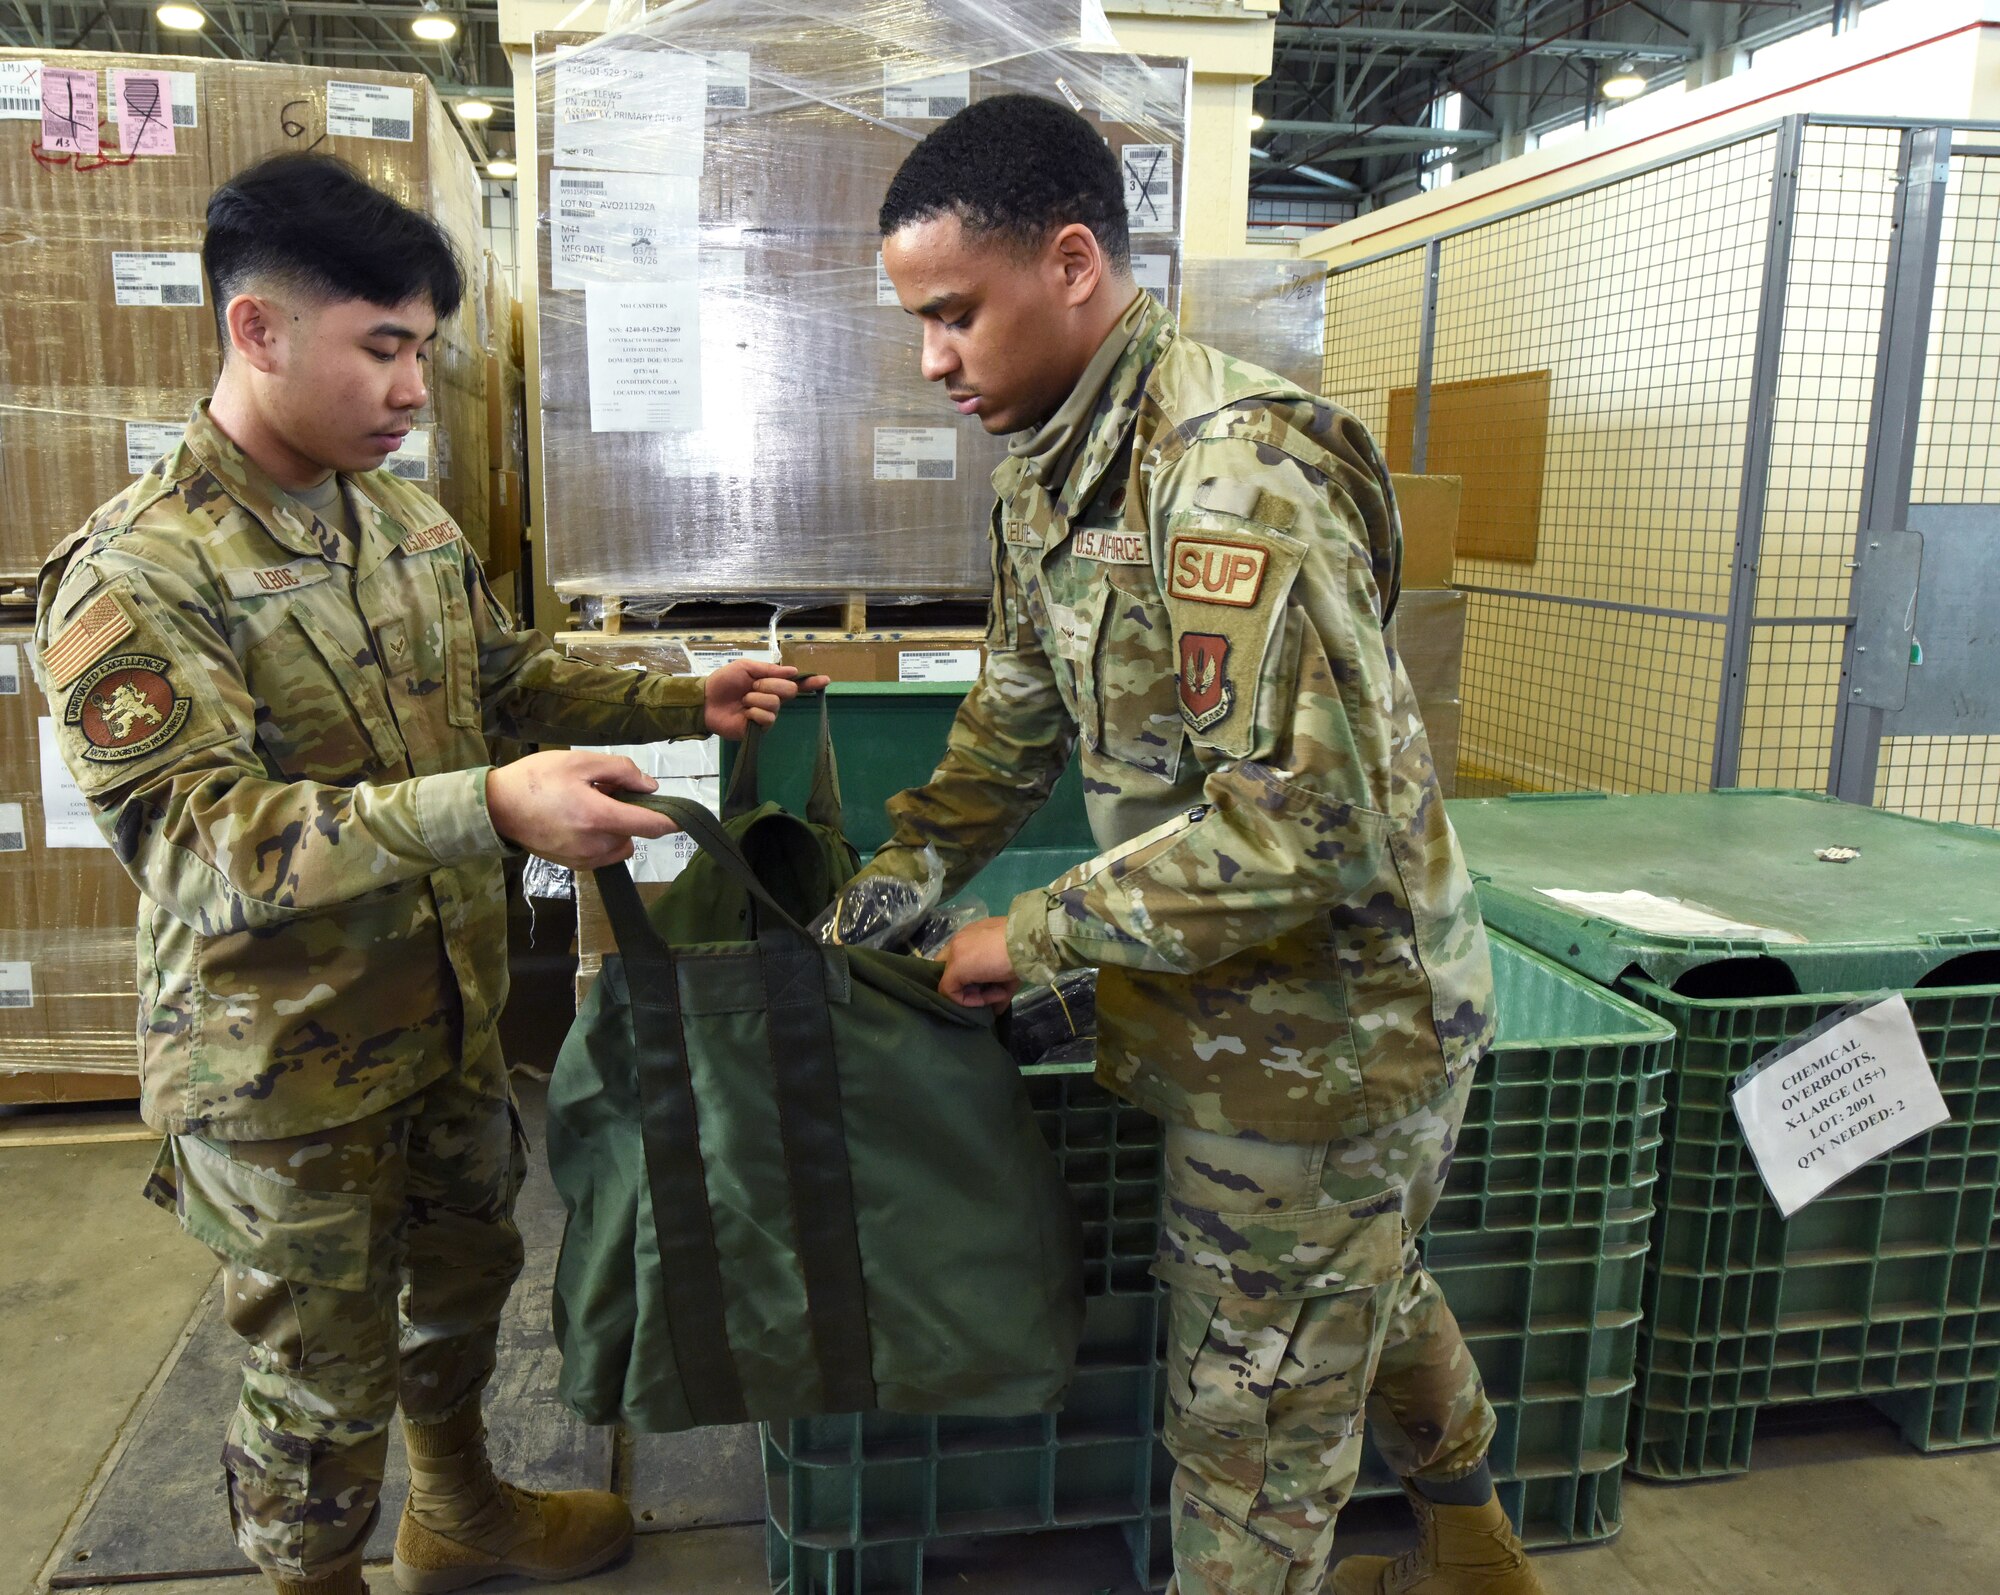 U.S. Air Force Airman 1st Class Kendrew Olboc, left, and Airman Yomar Celeste, both 100th Logistics Readiness Squadron Individual Protective Equipment apprentices, pack a real-world chemical “Class C” bag at Royal Air Force Mildenhall, England, March 15, 2022. Airmen in the IPE shop support geographically separated units including RAF Croughton, and Stavanger, Norway, and issue all gear for chemical warfare assets to members tasked for deployments and TDYs, ensuring they are issued the correct equipment. (U.S. Air Force photo by Karen Abeyasekere)